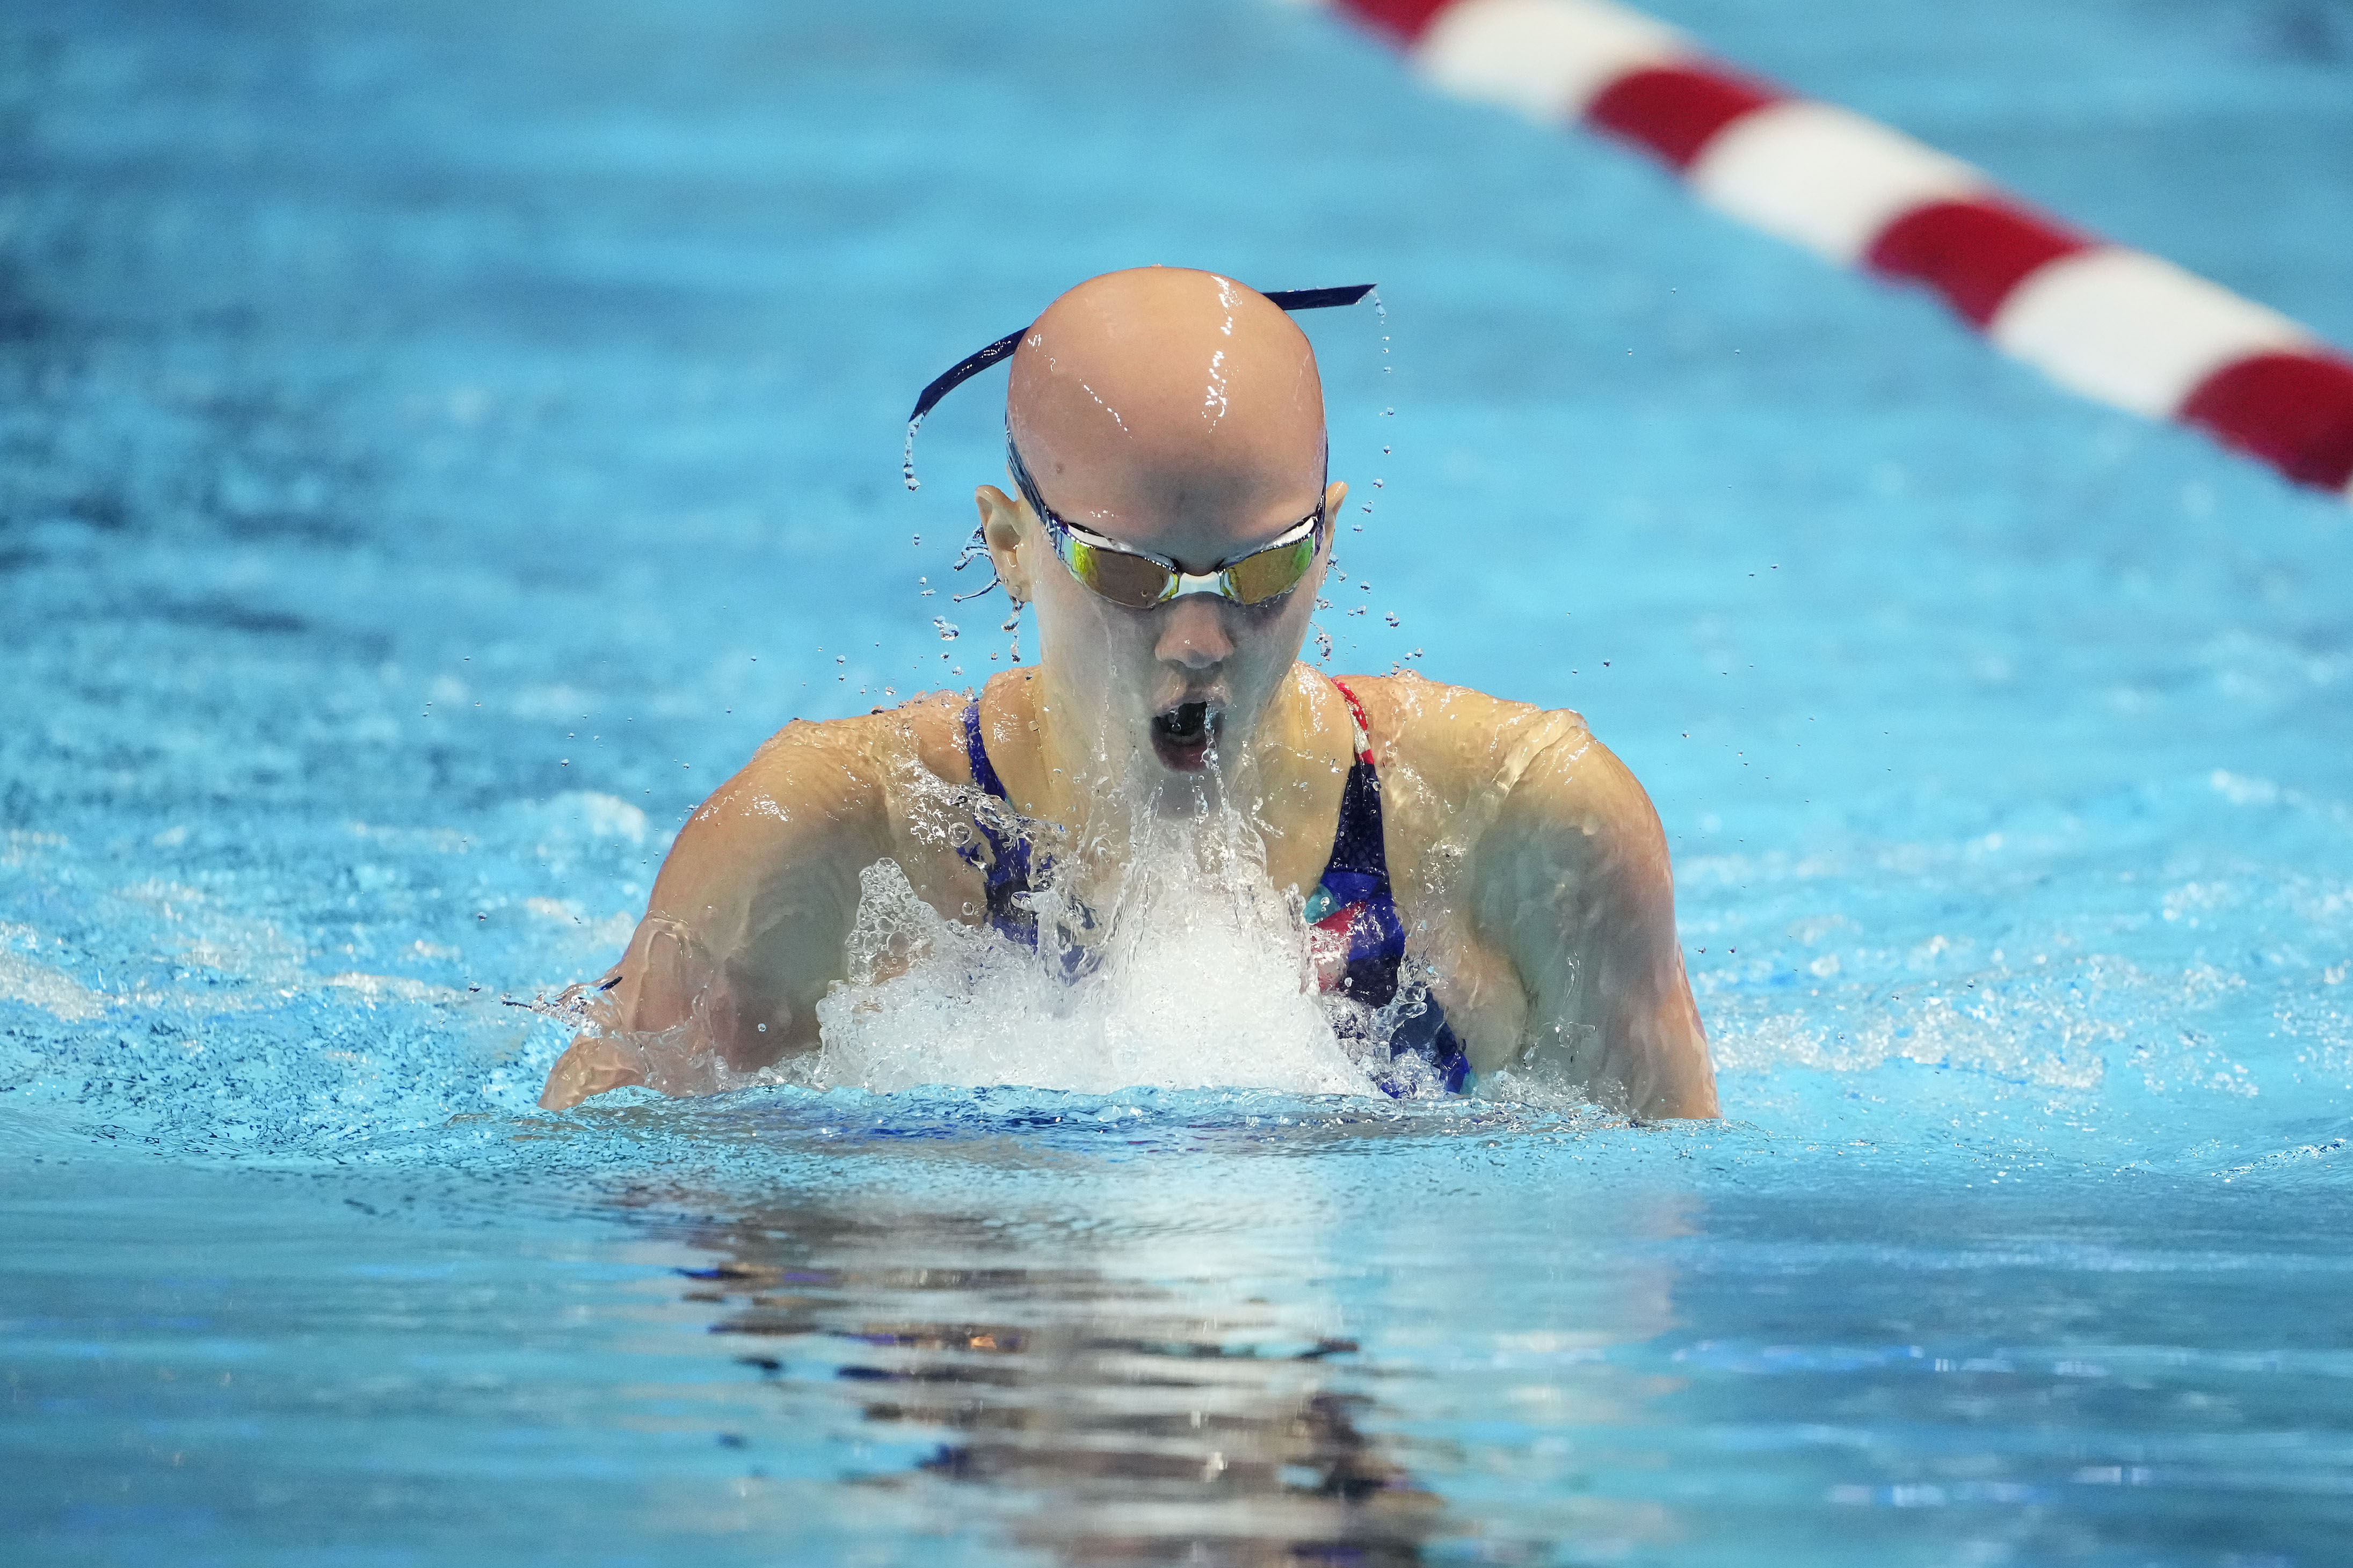 Leah Hayes wants to bring alopecia awareness to the Olympics